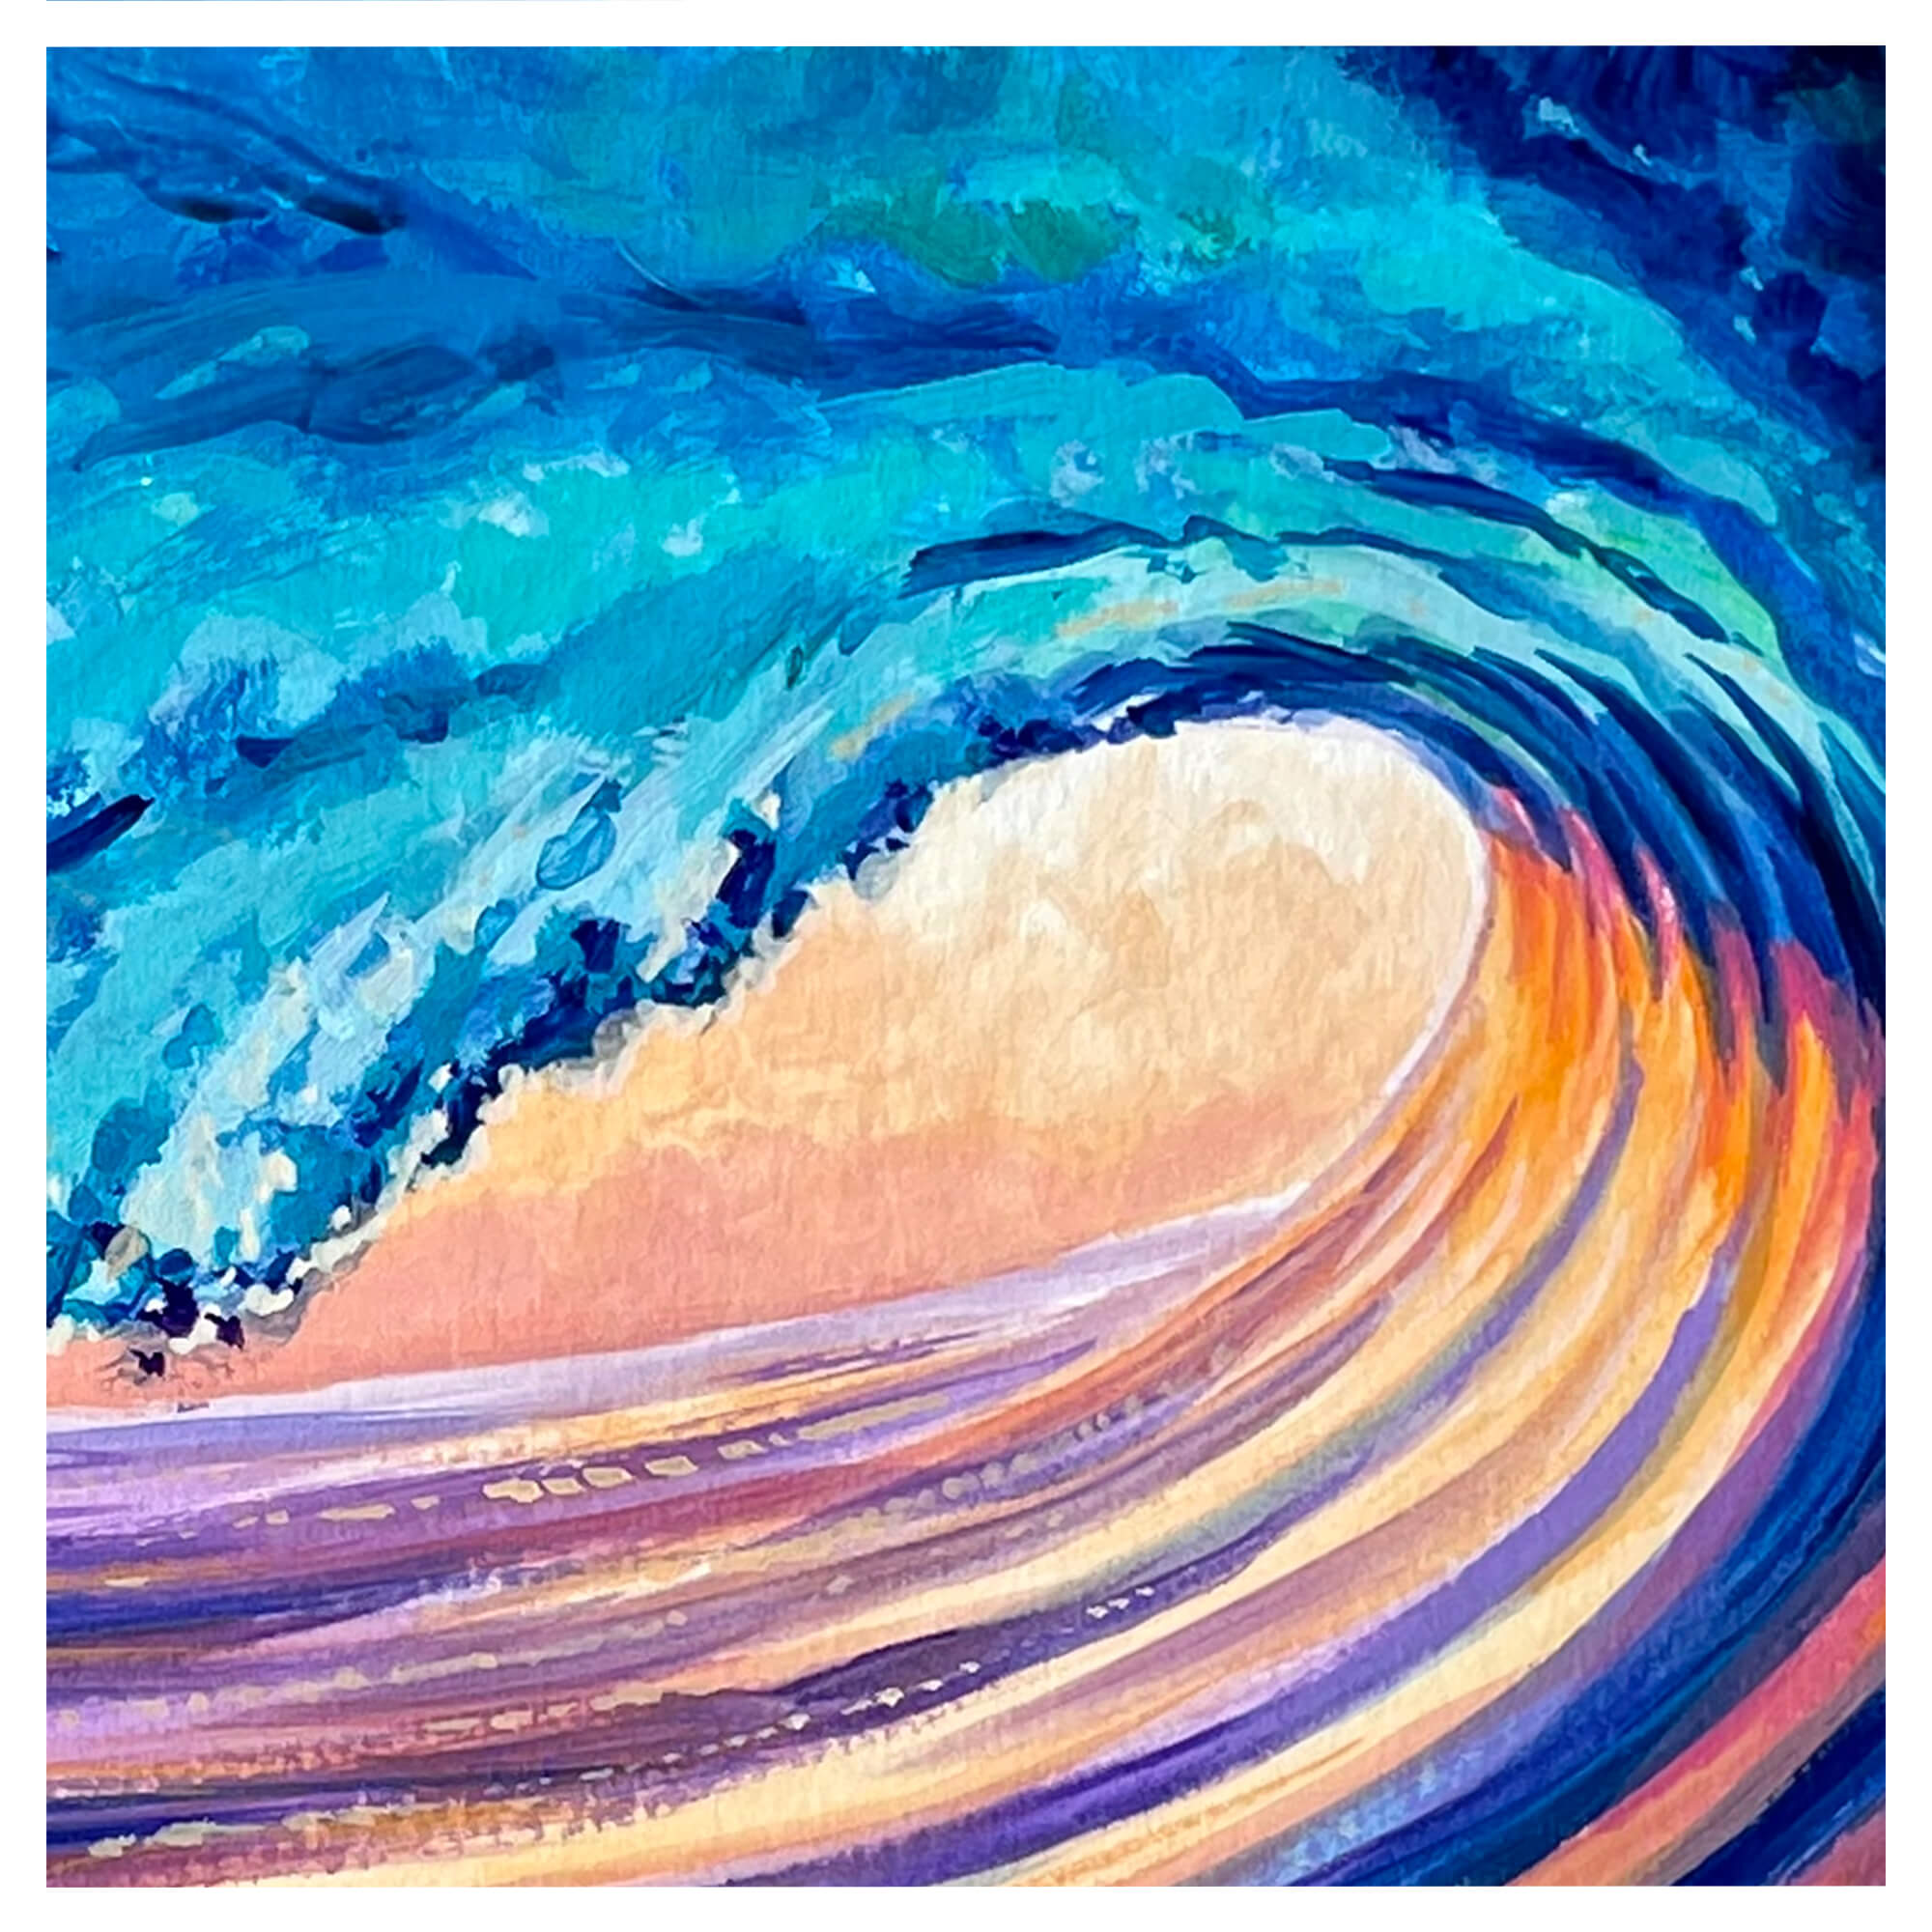 Blue with purple and orange hue wave art by Hawaii artist Patrick Parker